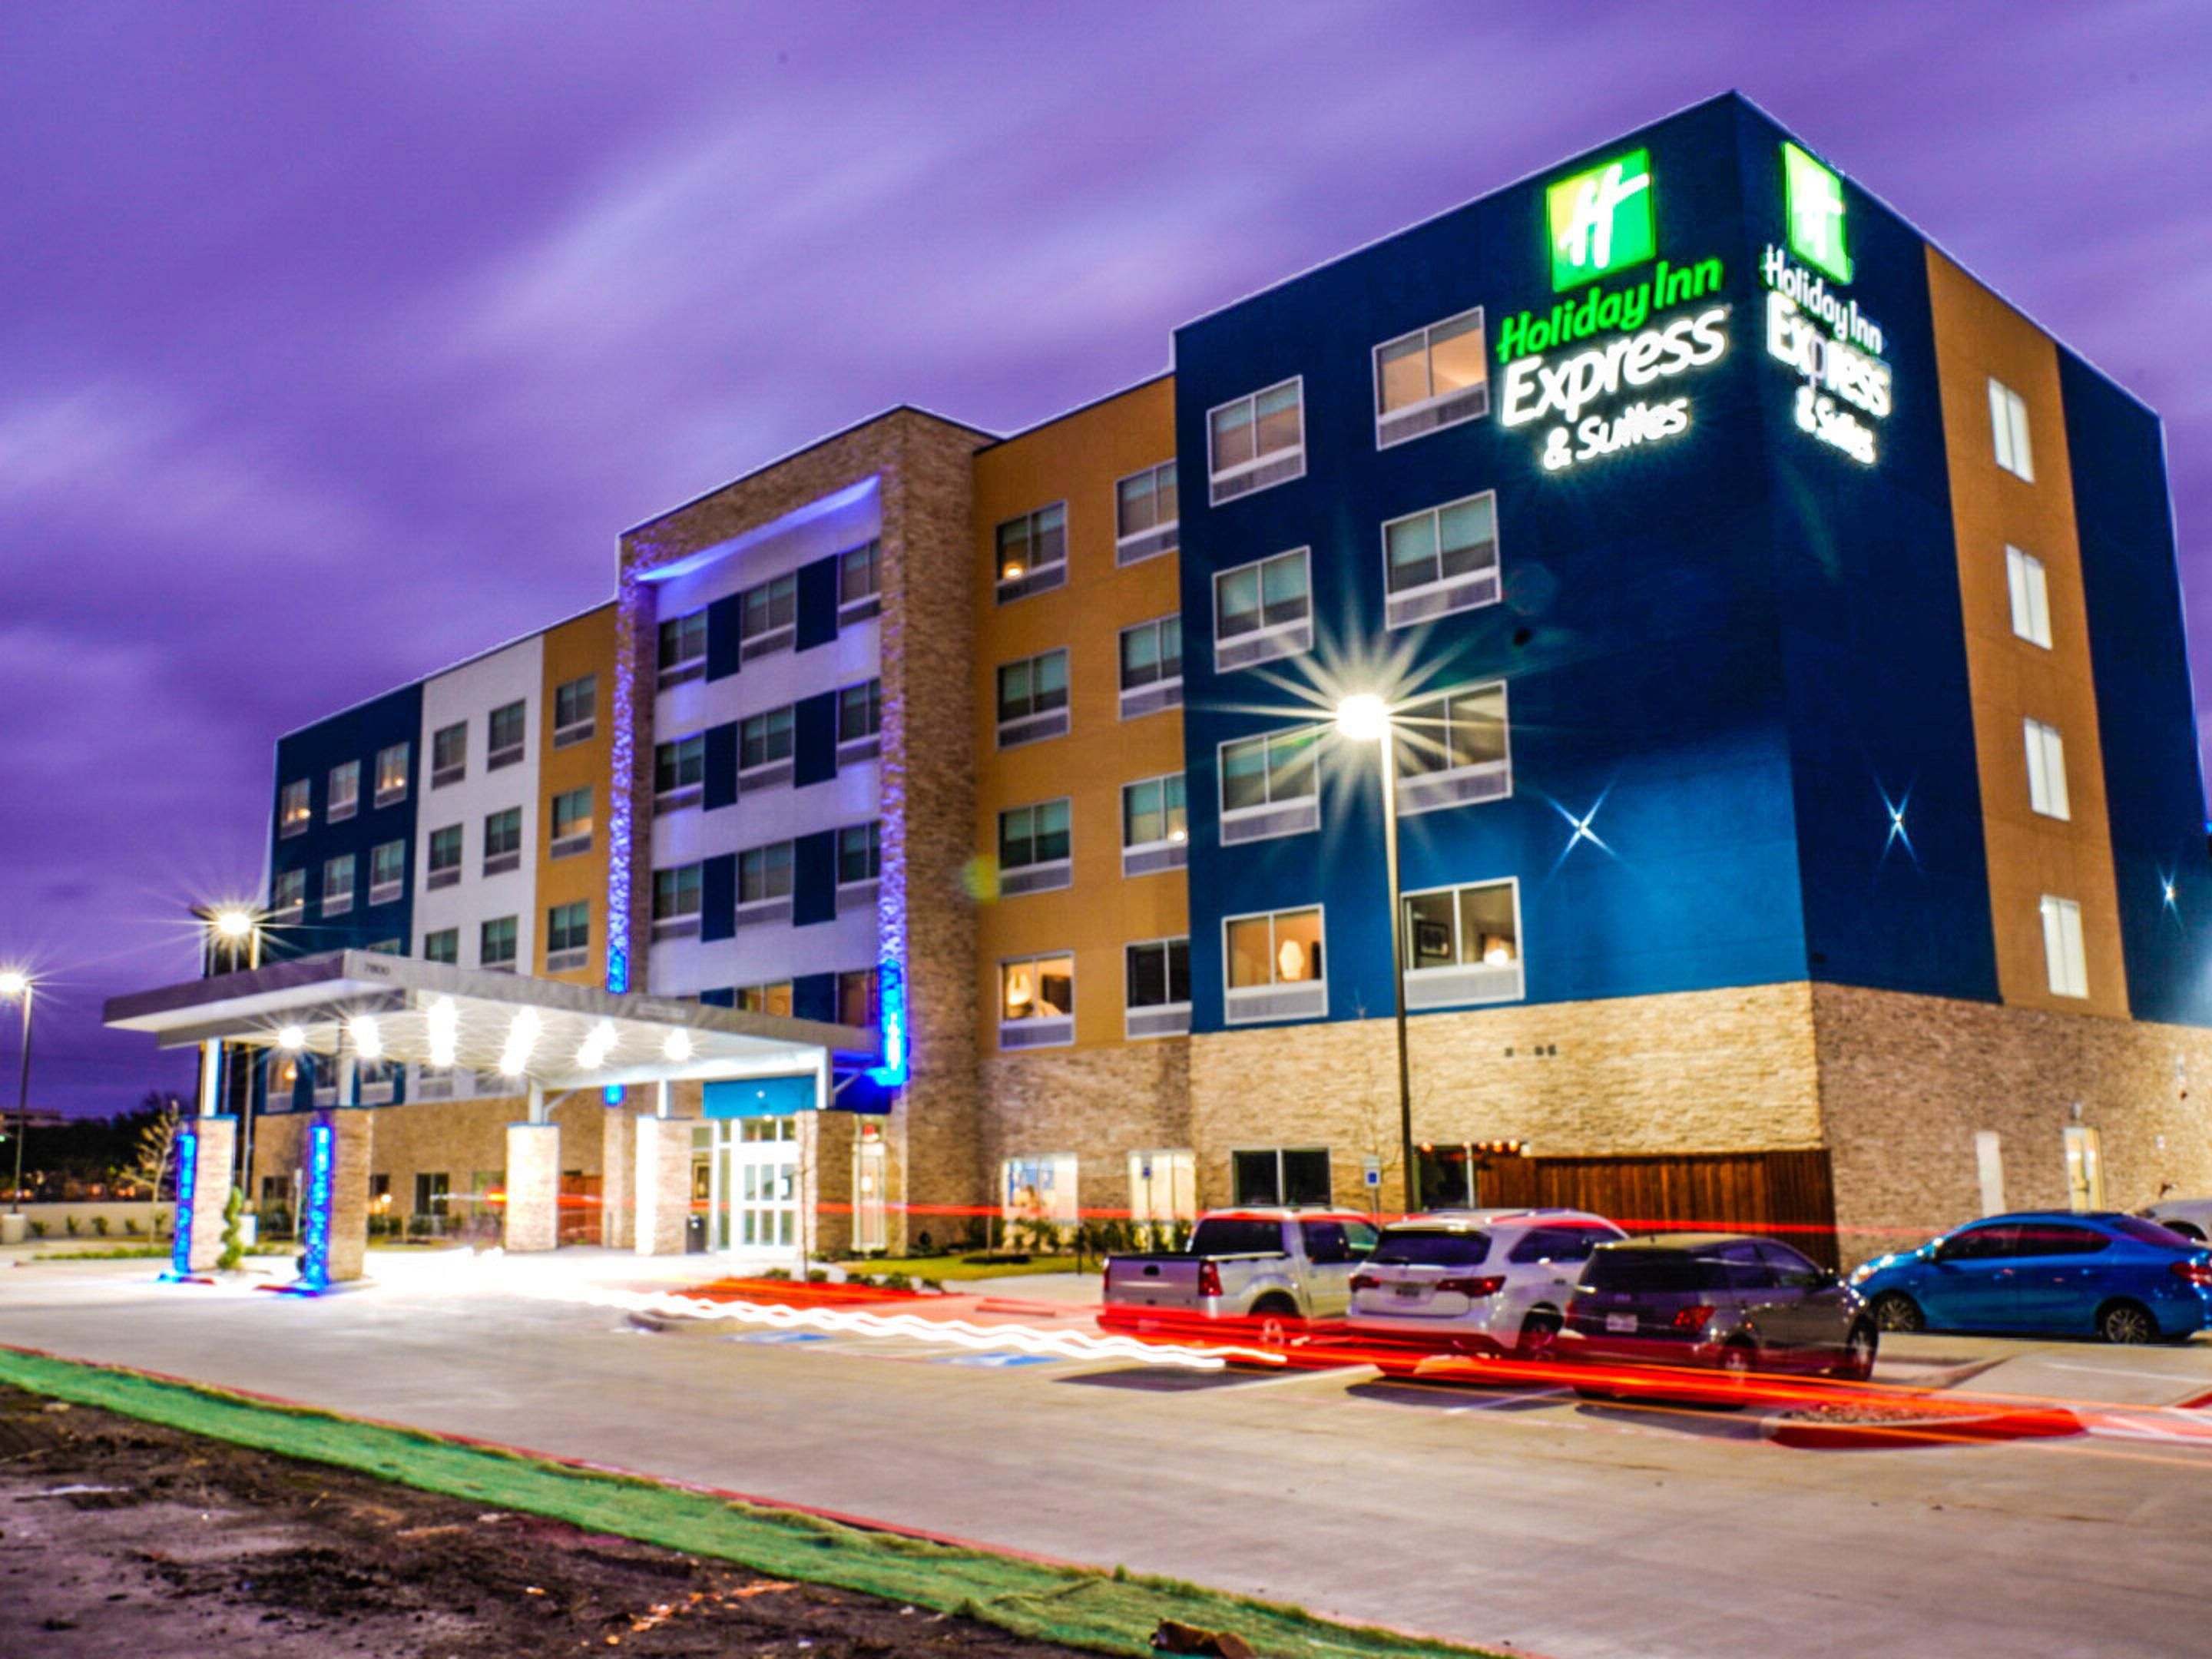 Express inn and suites